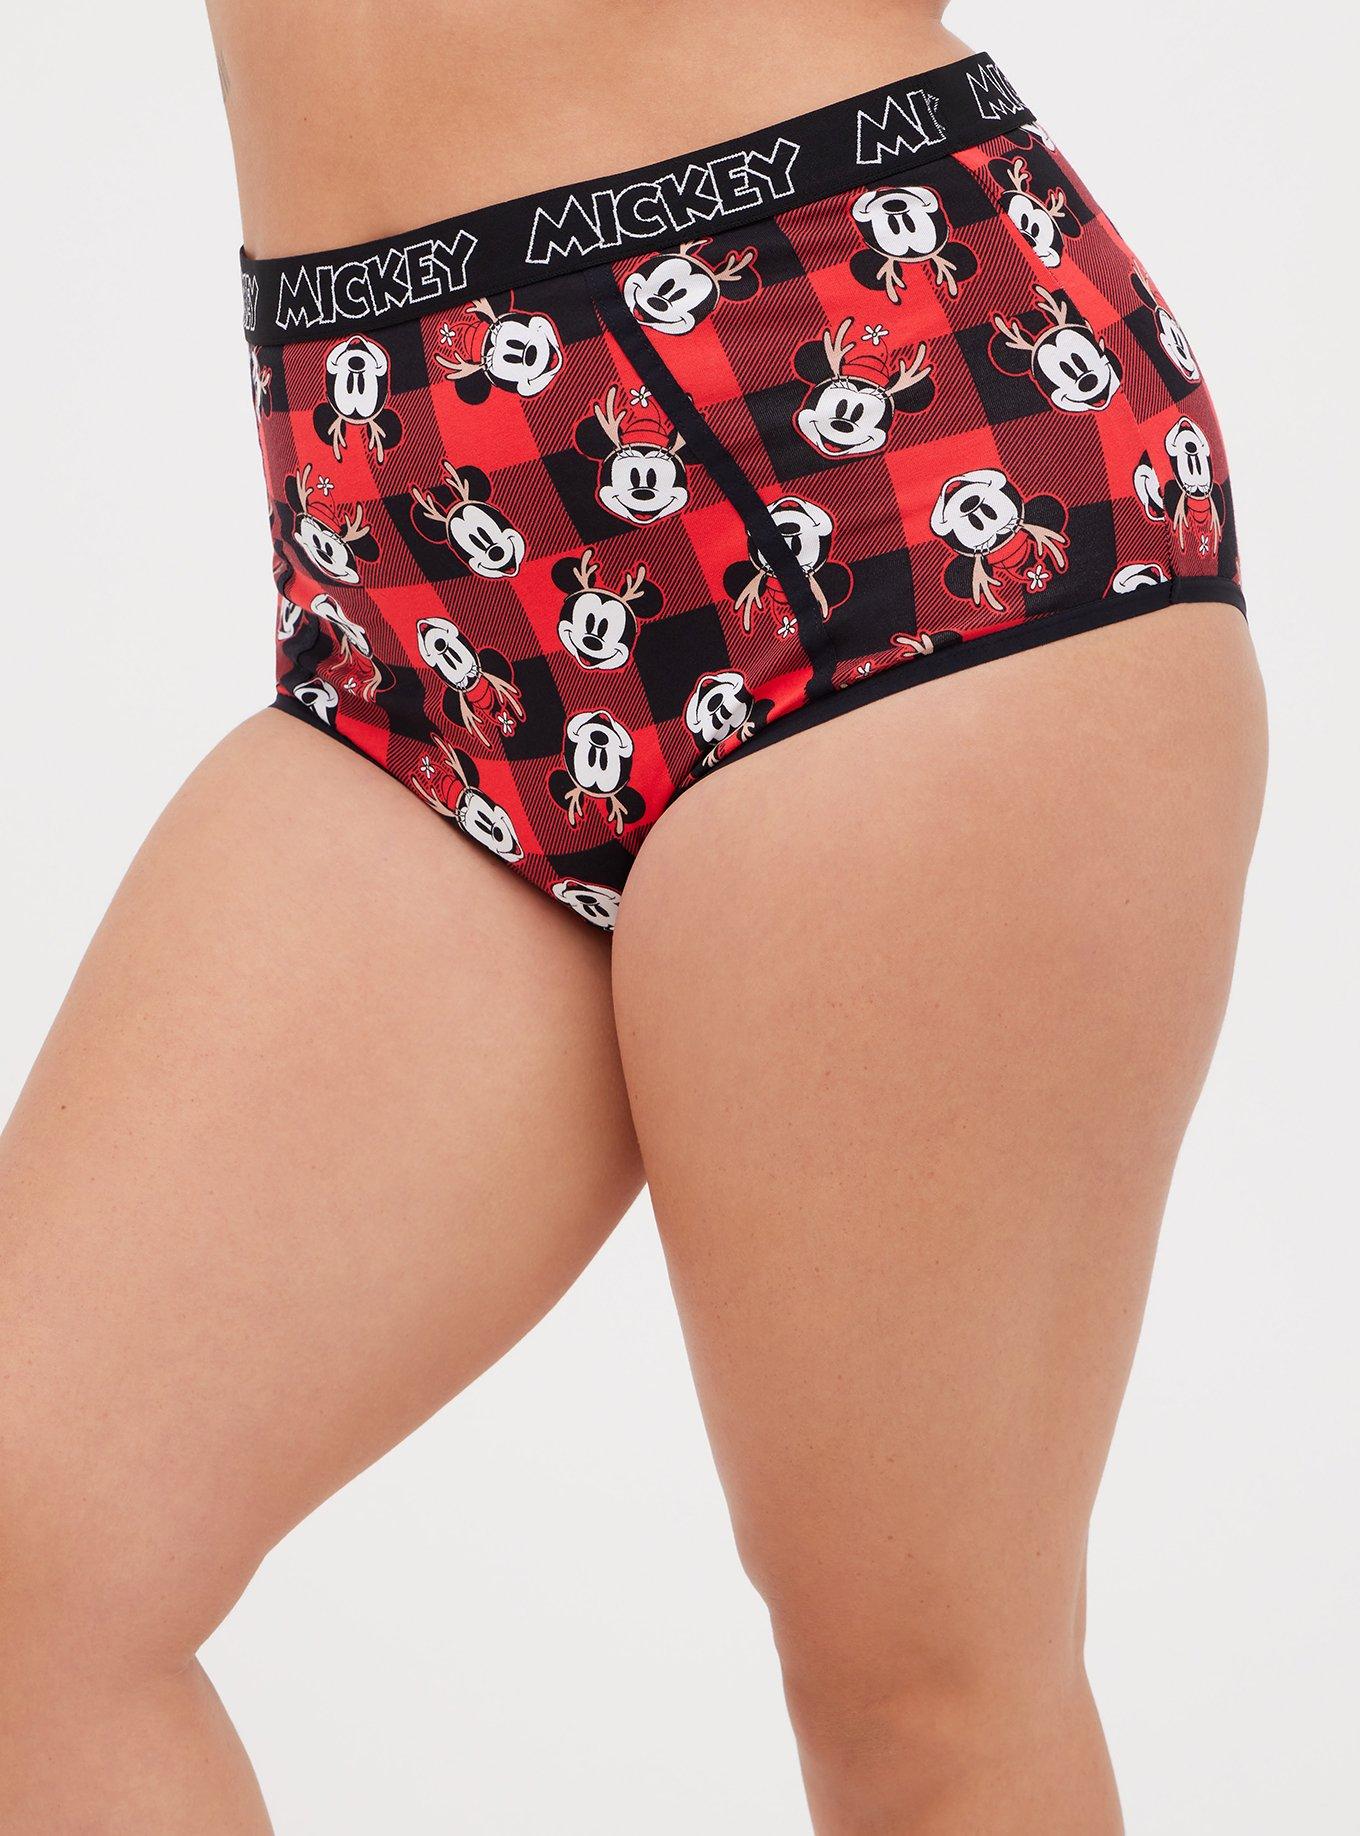 Plus Size - Disney High Waist Cheeky Panty - Cotton Mickey Mouse Plaid Red  - Torrid